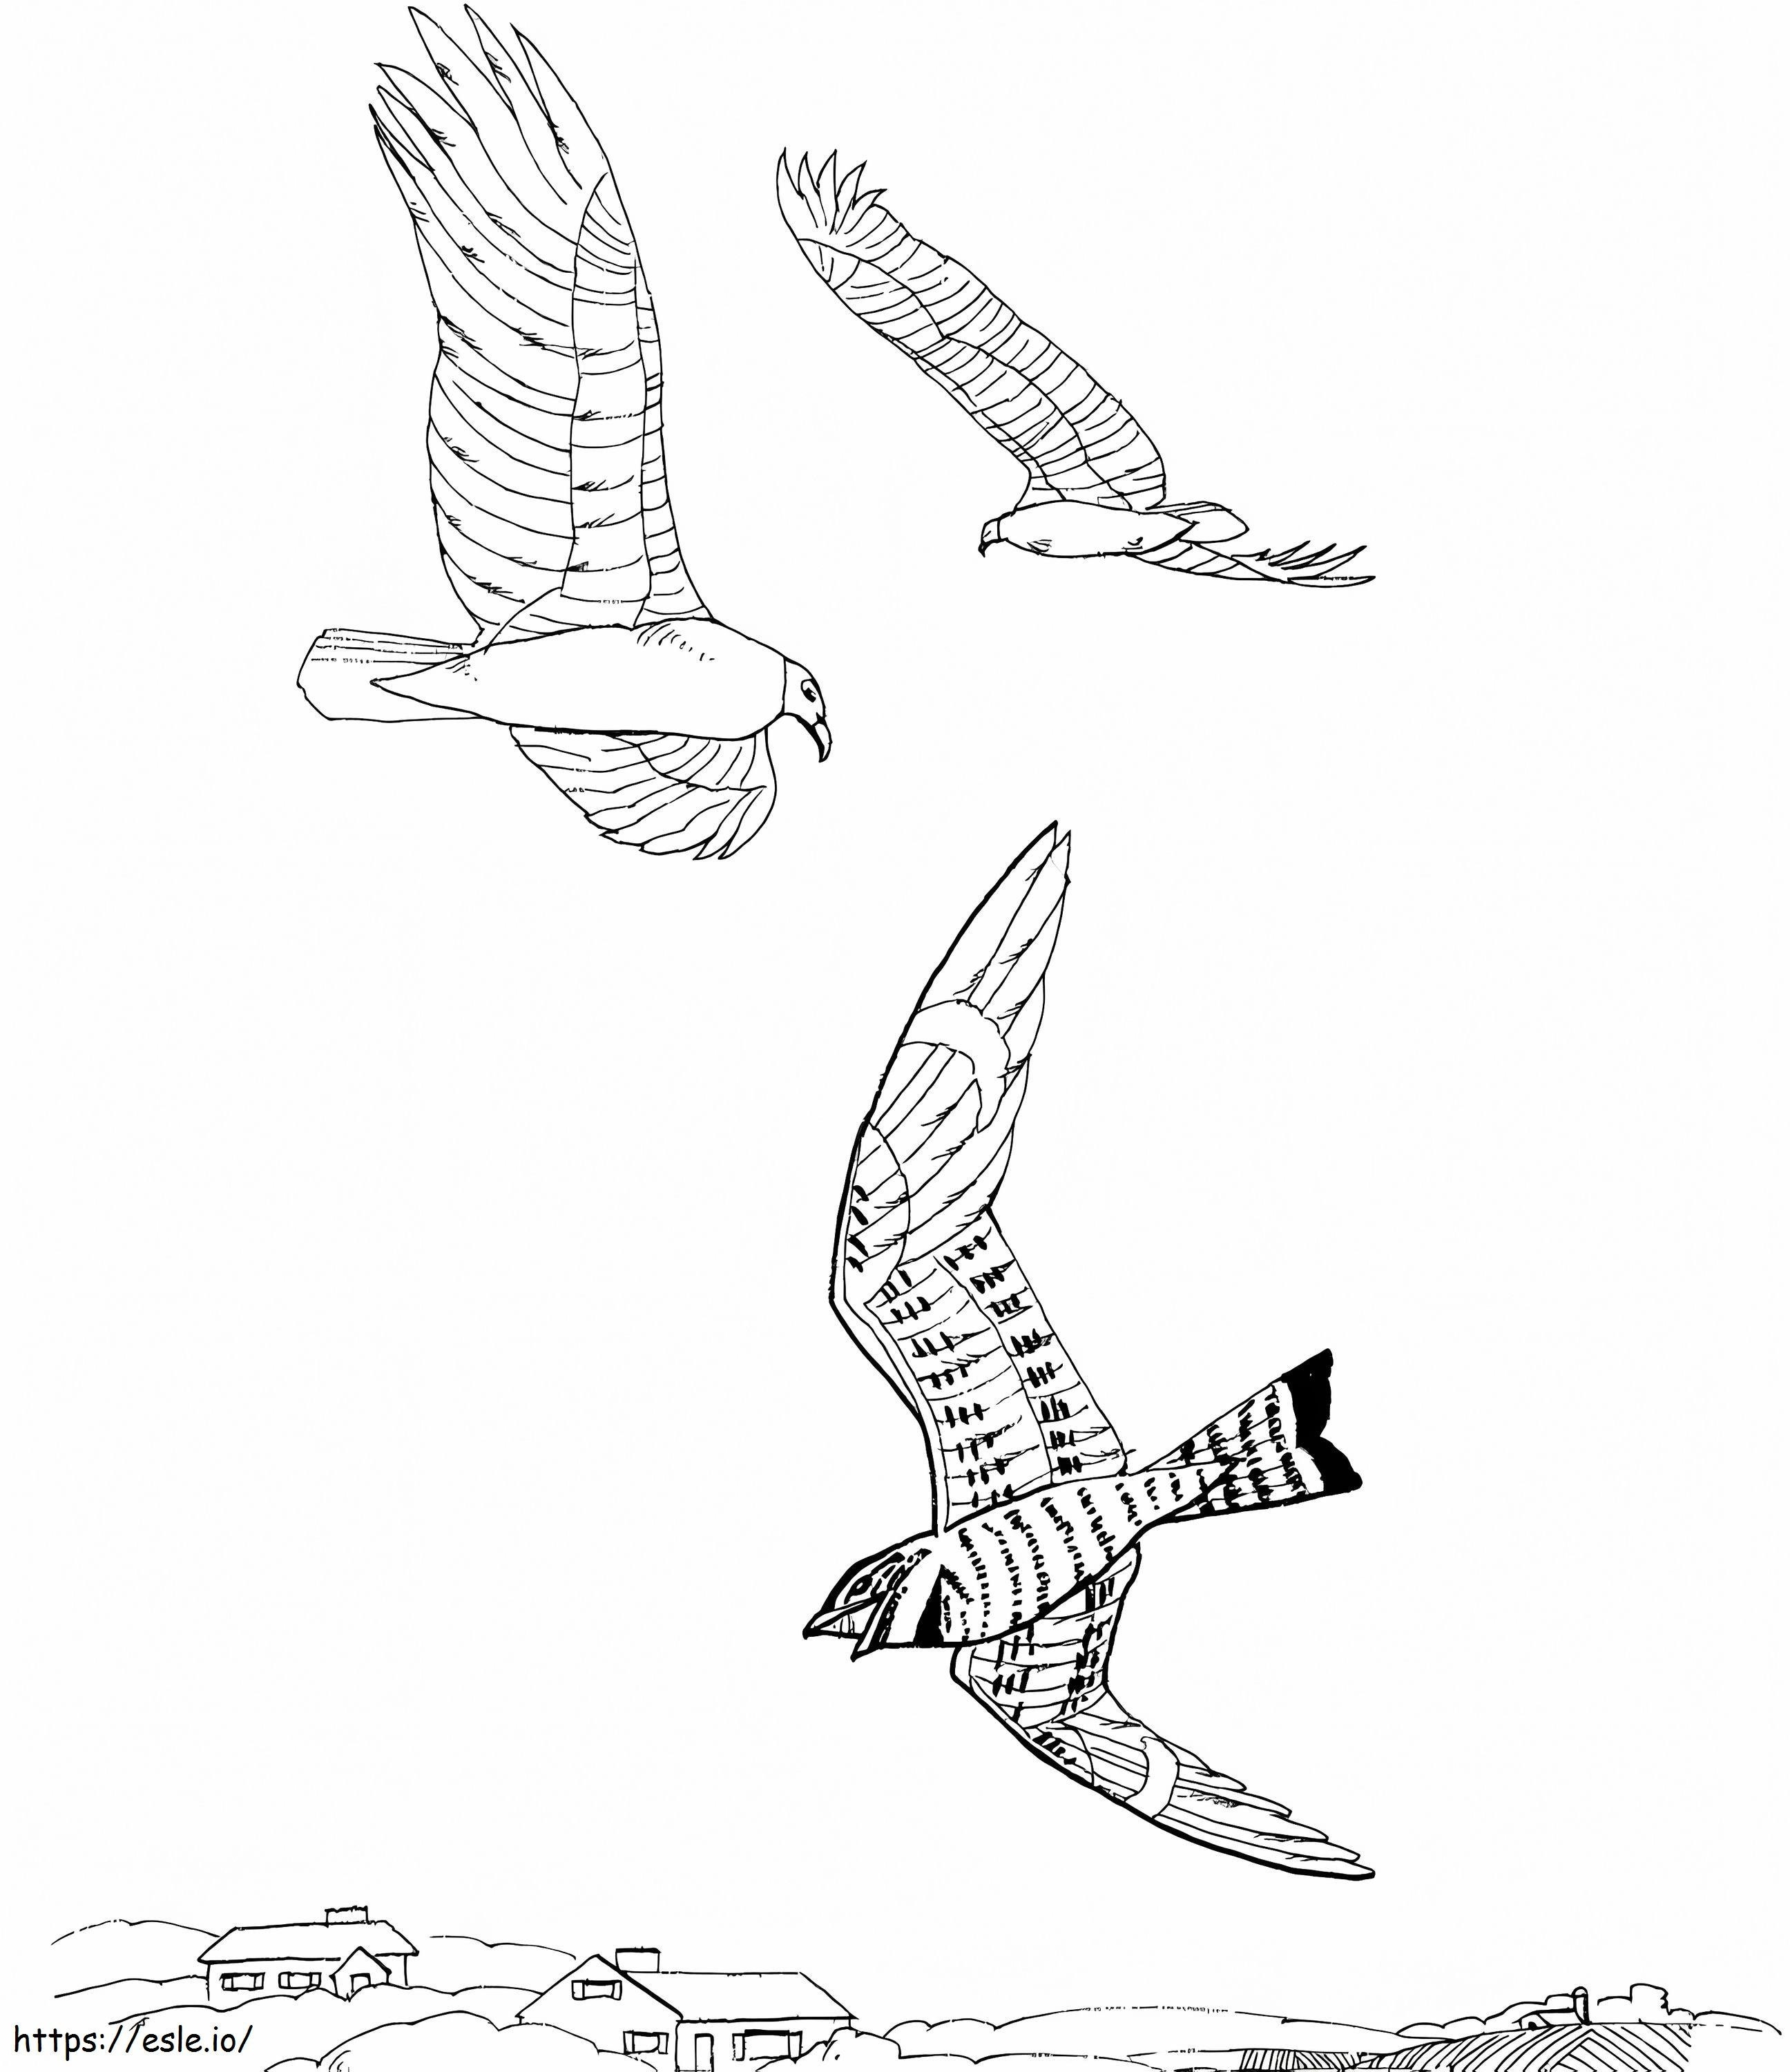 Vultures coloring page